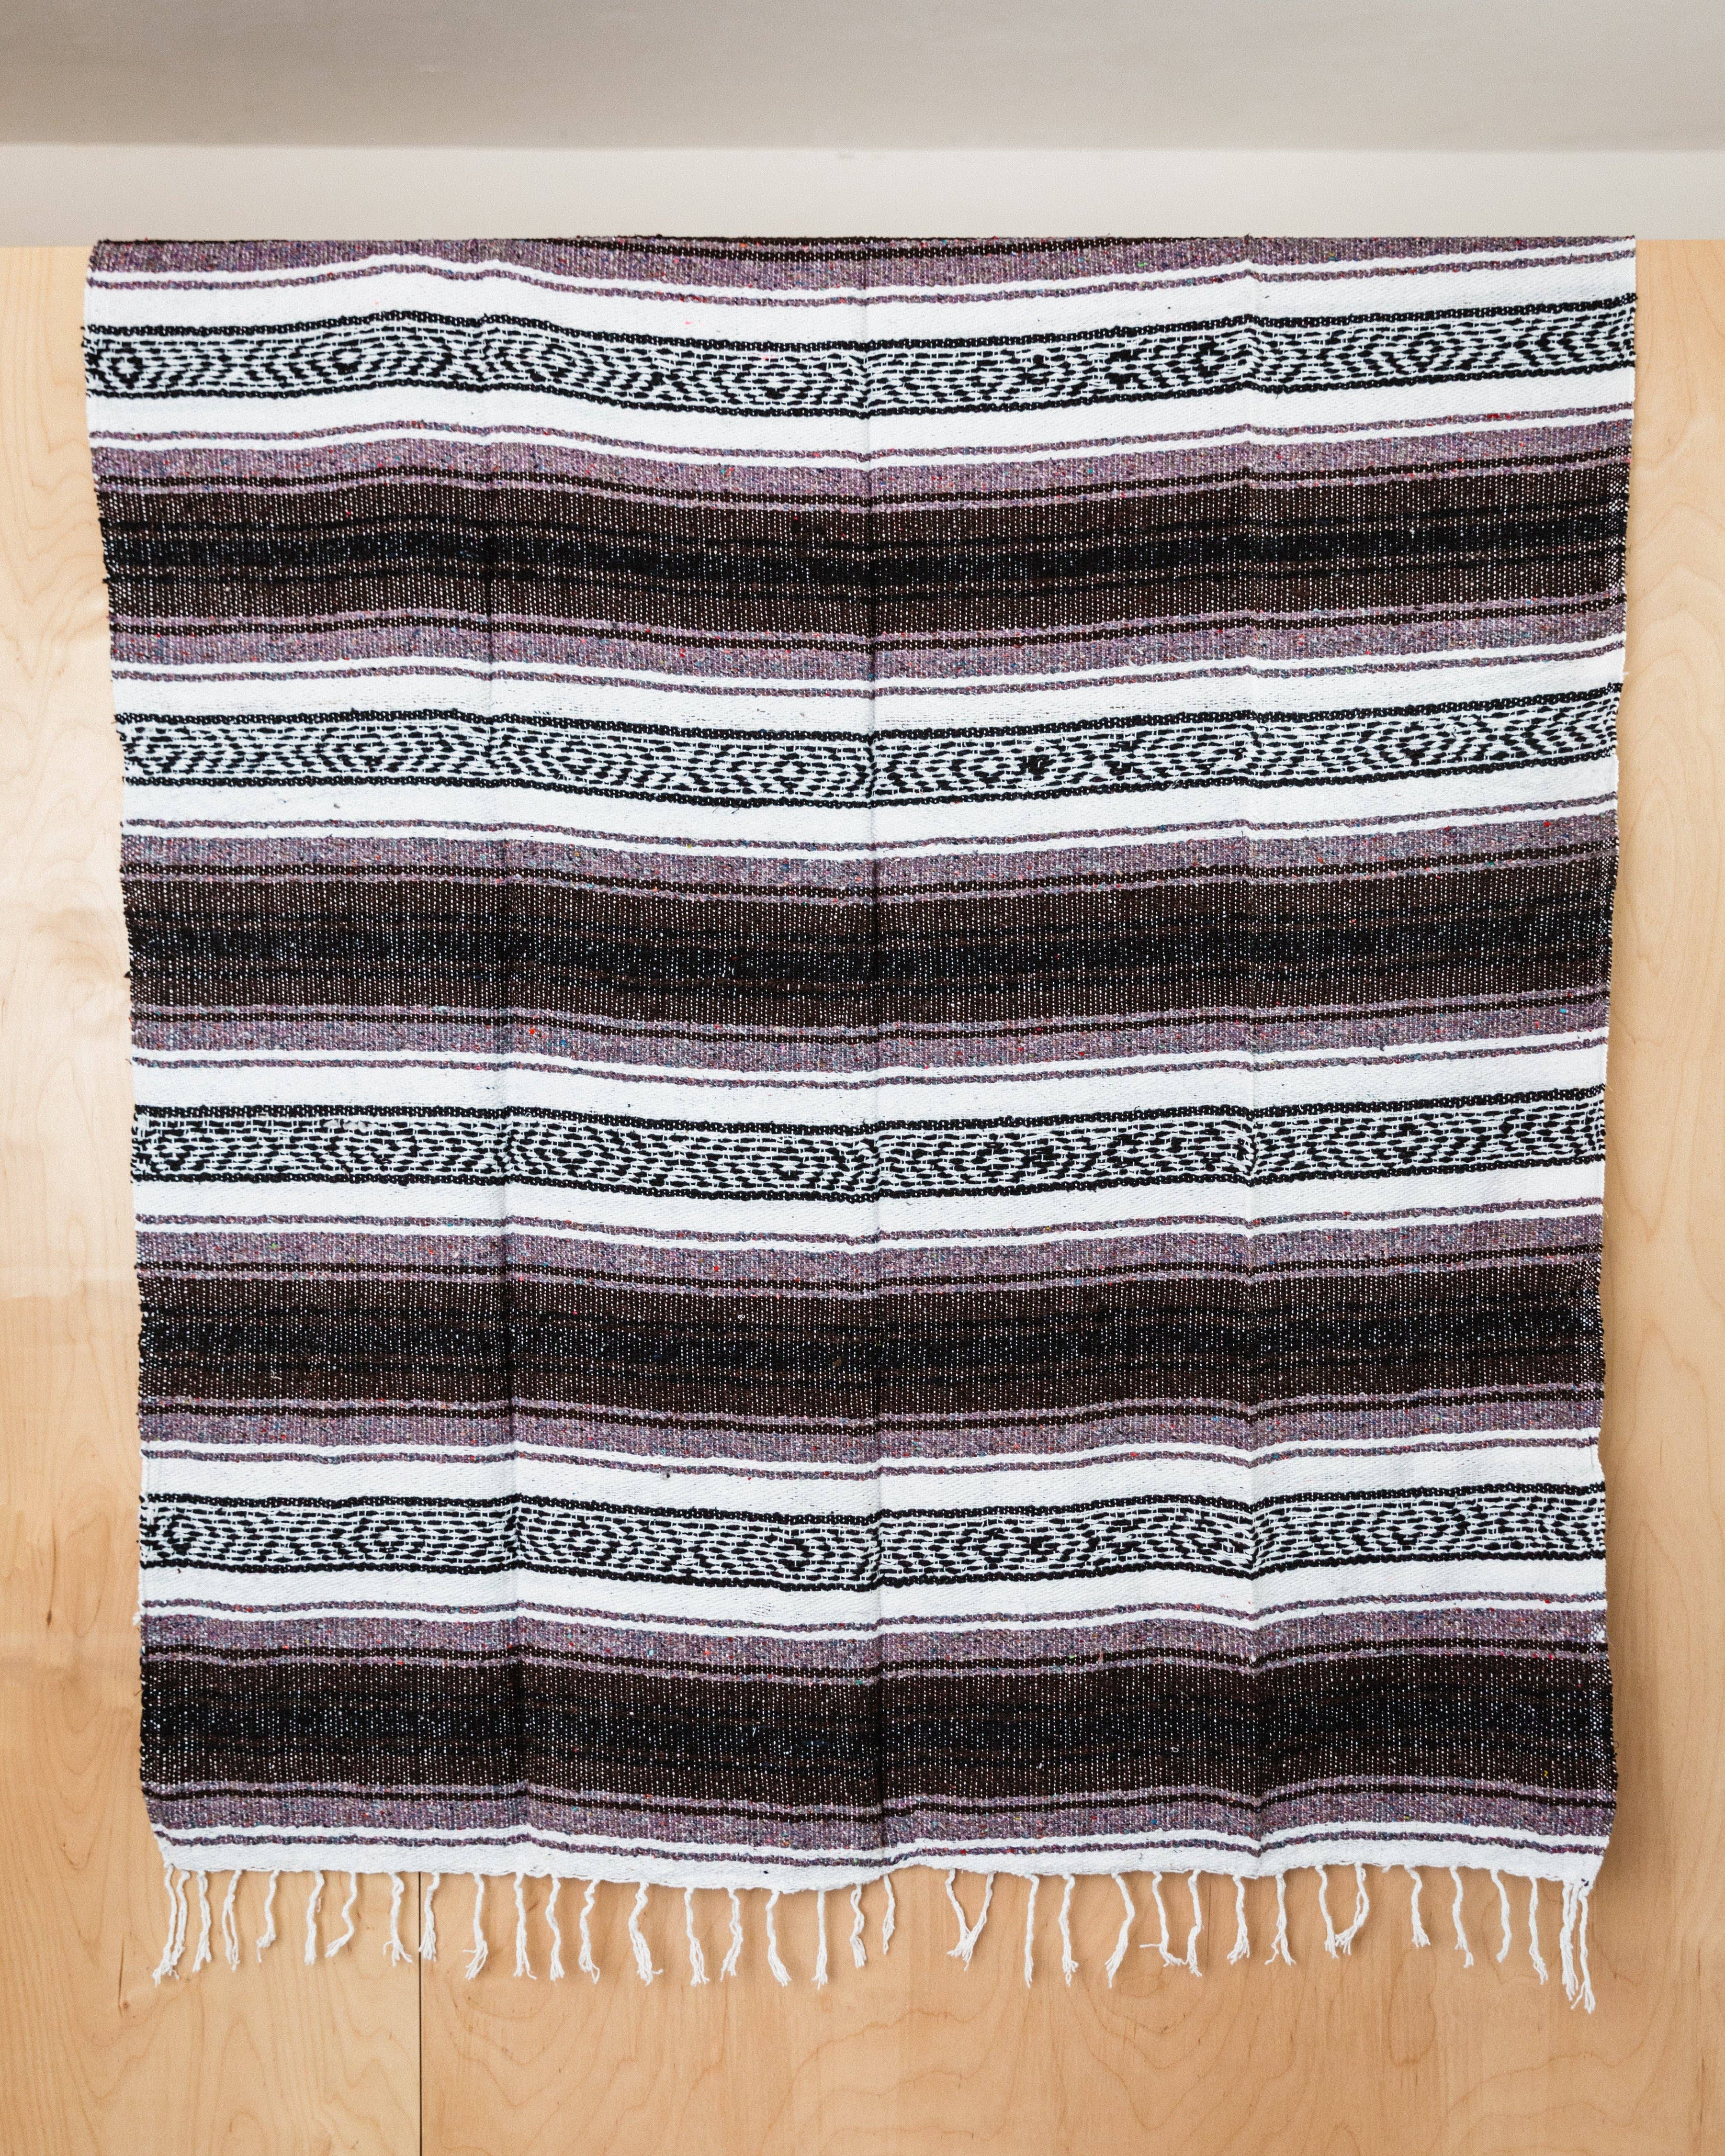 CHARCOAL GRAY Mexican Fiesta Decor SOUTHWESTERN 4' x 6' TRIBAL SOLID BLANKET 